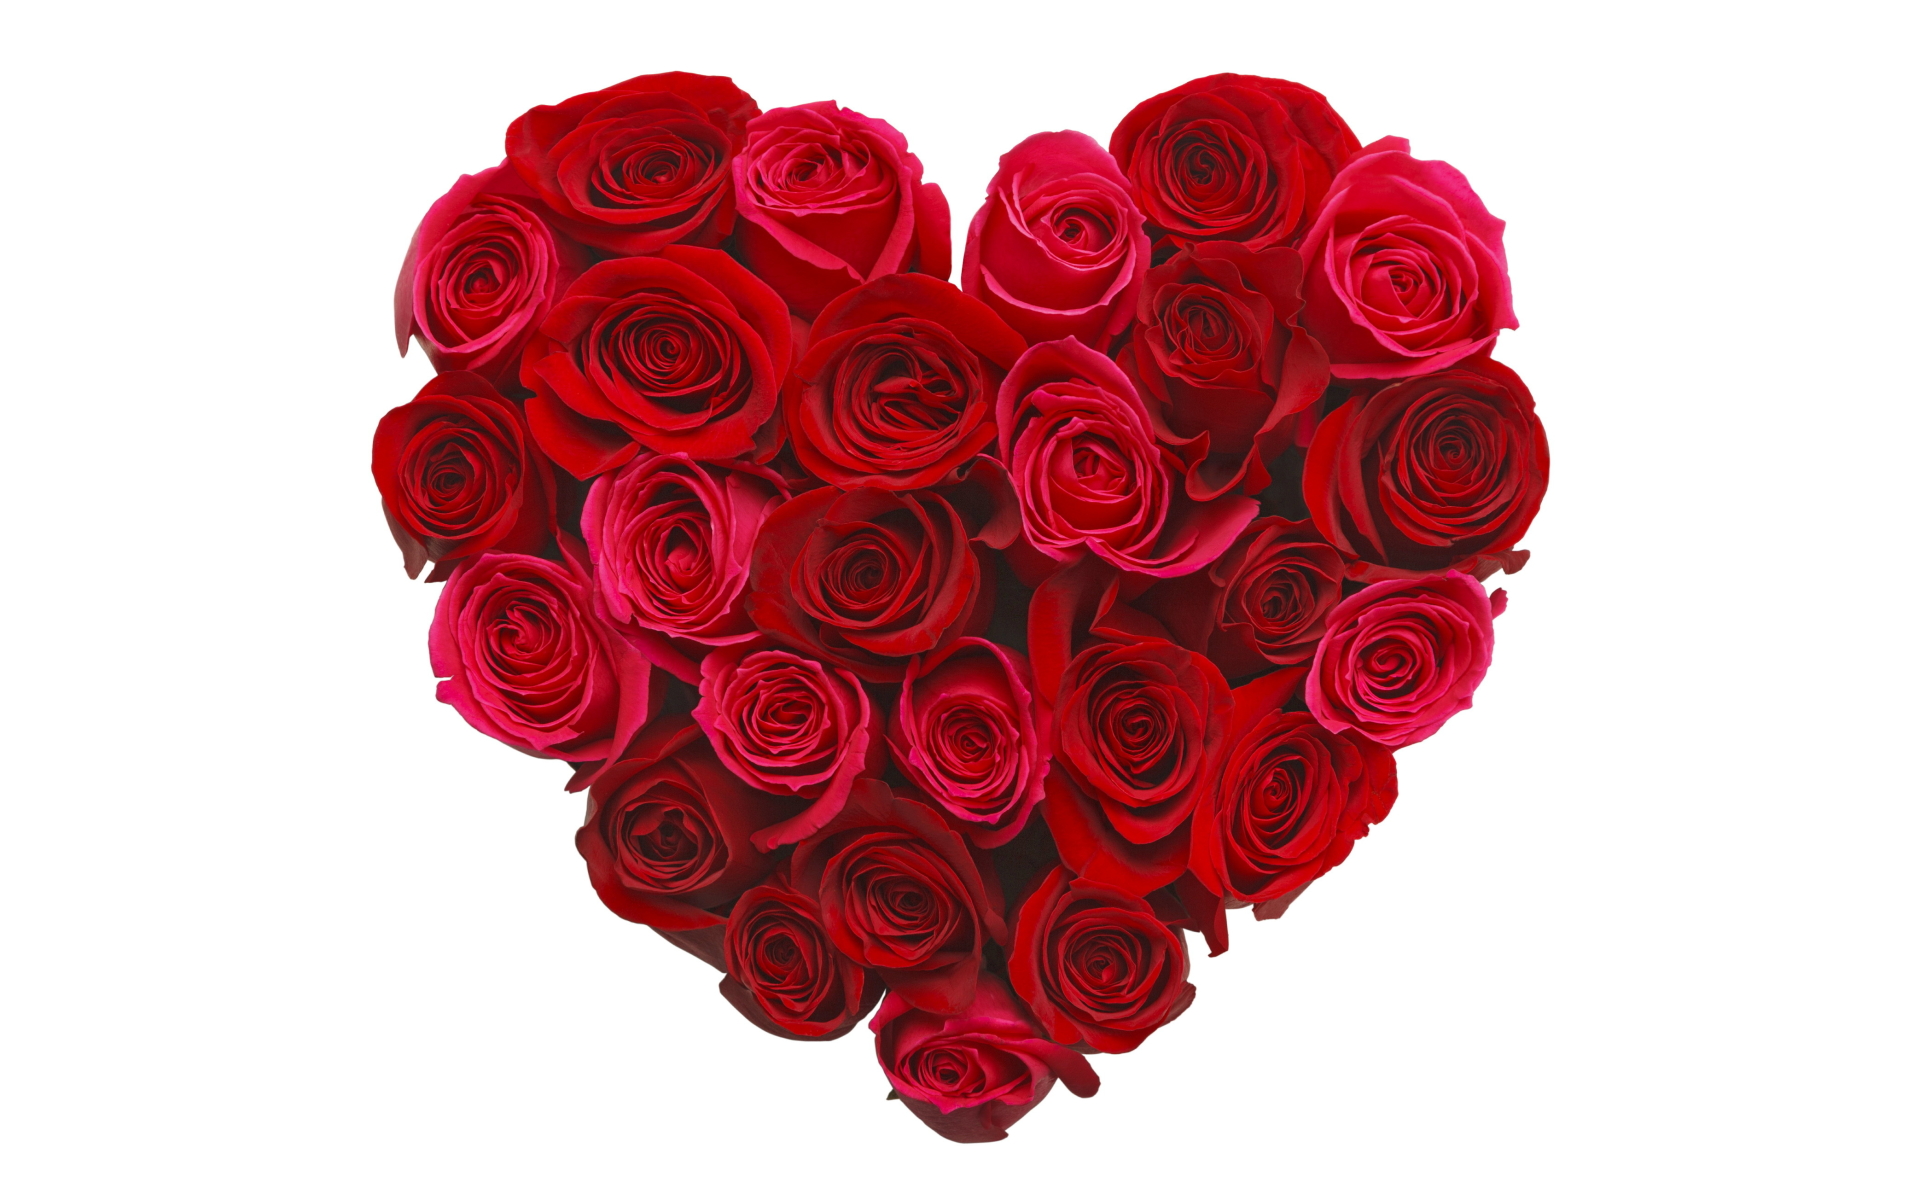 Red Roses Heart Wallpaper Stock Photos